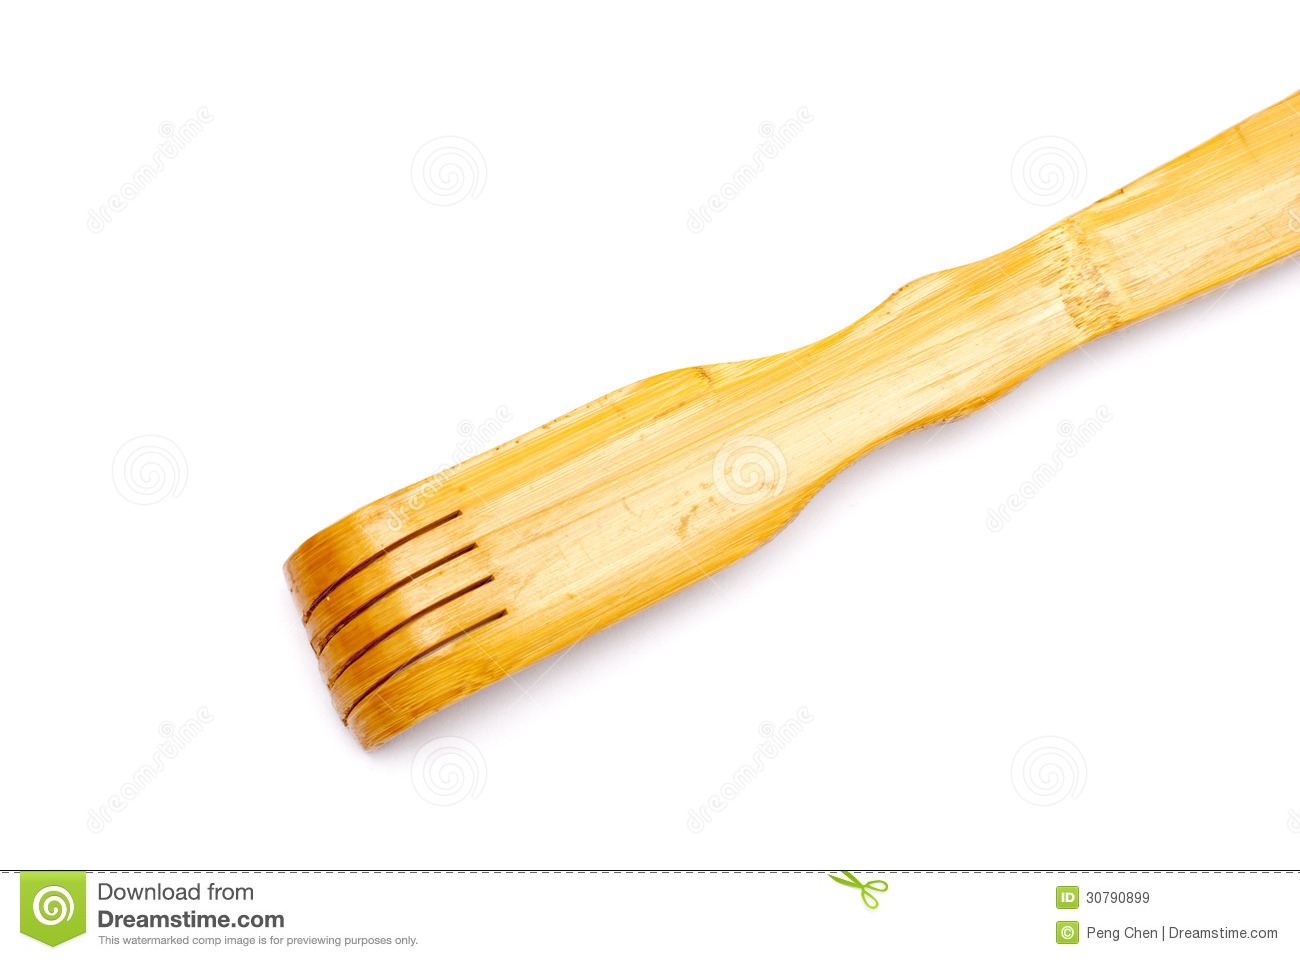 Itch Scratcher Royalty Free Stock Images   Image  30790899